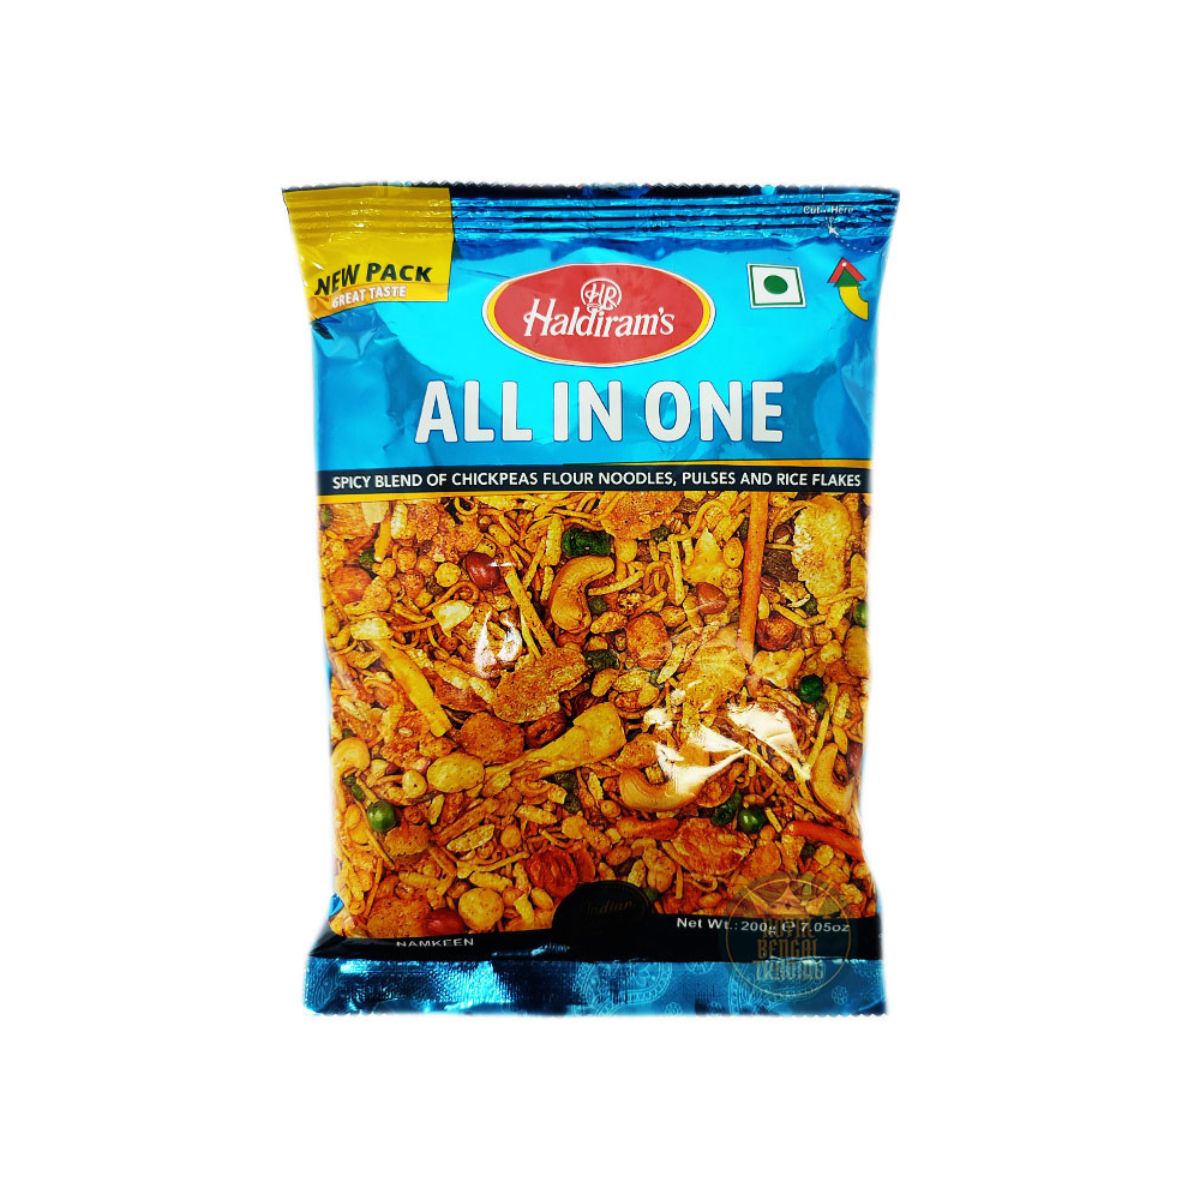 Haldiram's All In One - Spicy Blend Of Chickpeas Flour Noodles, Pulses And Rice Flakes - 200g